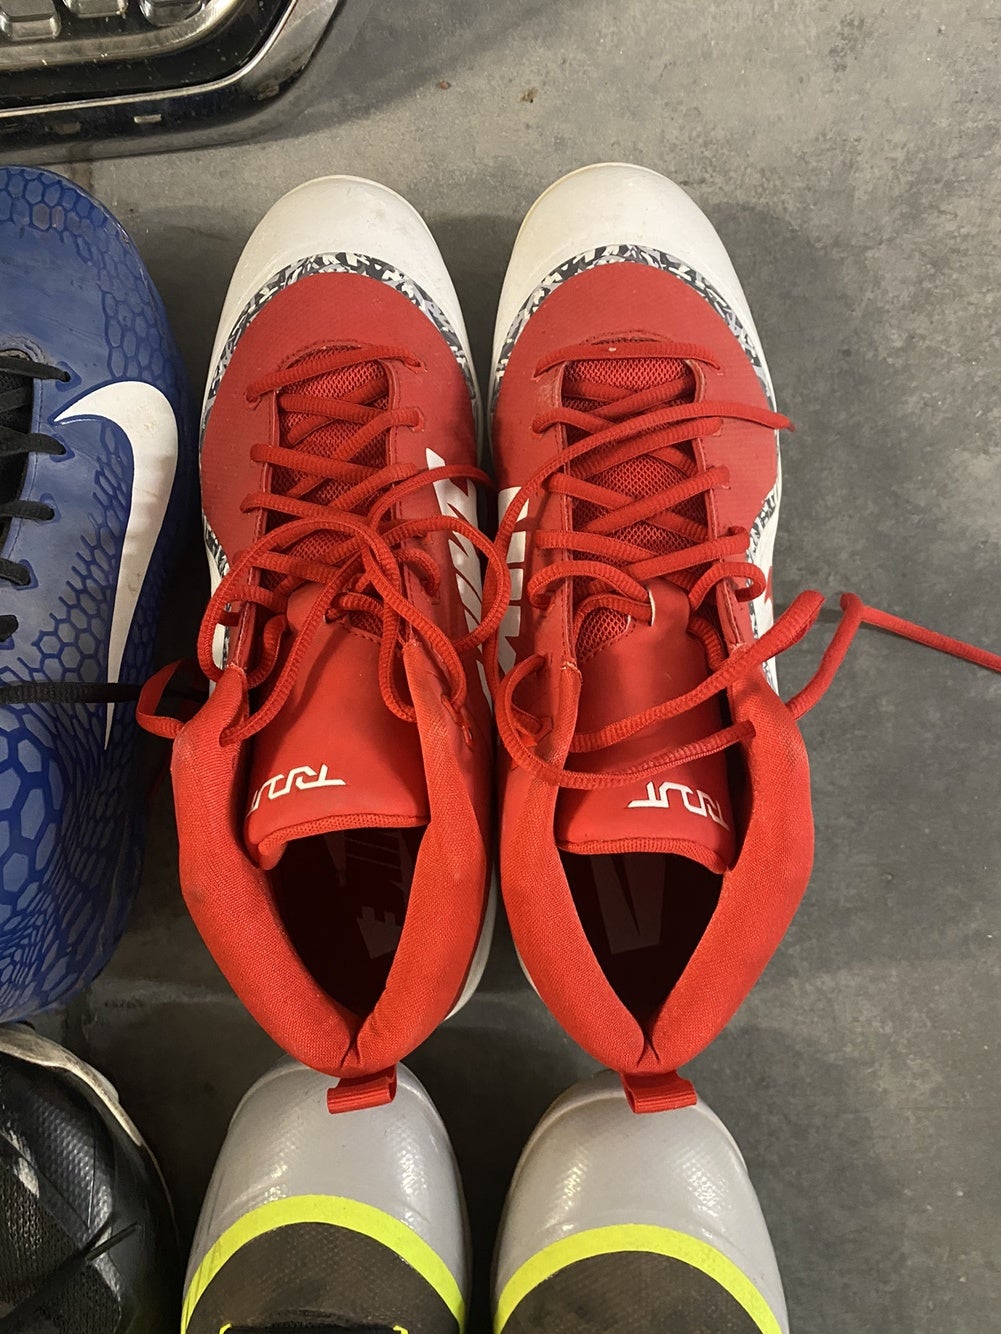 Mike Trout will be wearing a pair of trout-themed Nike cleats in the 2014  MLB All-Star Game - NBC Sports